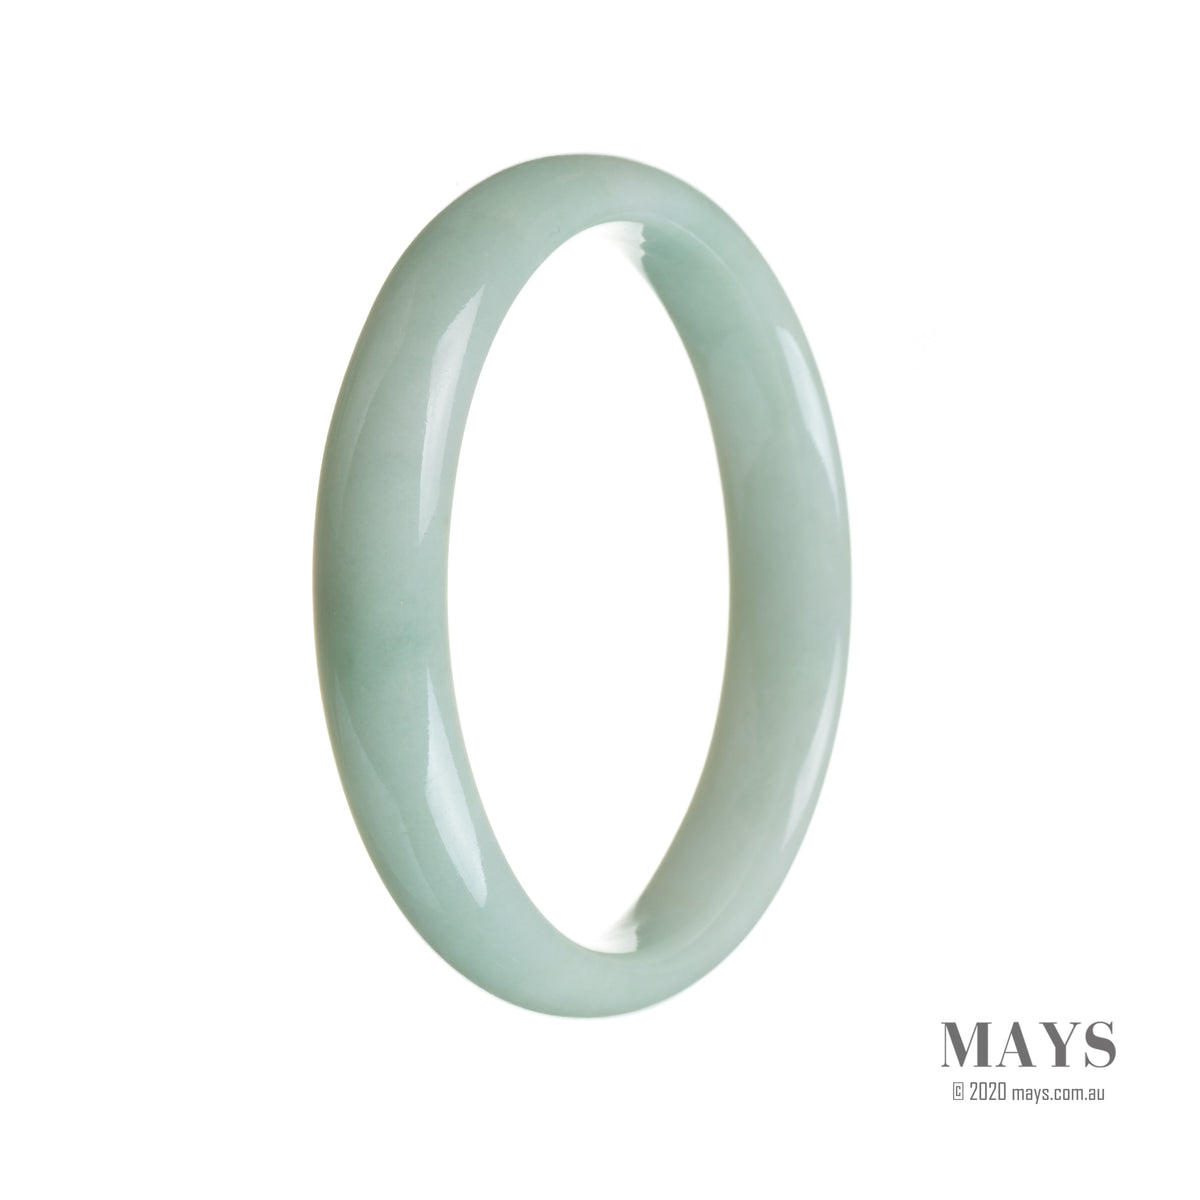 A beautiful pale green Burma Jade bracelet with a half moon design, measuring 59mm. Made with genuine Type A jade.